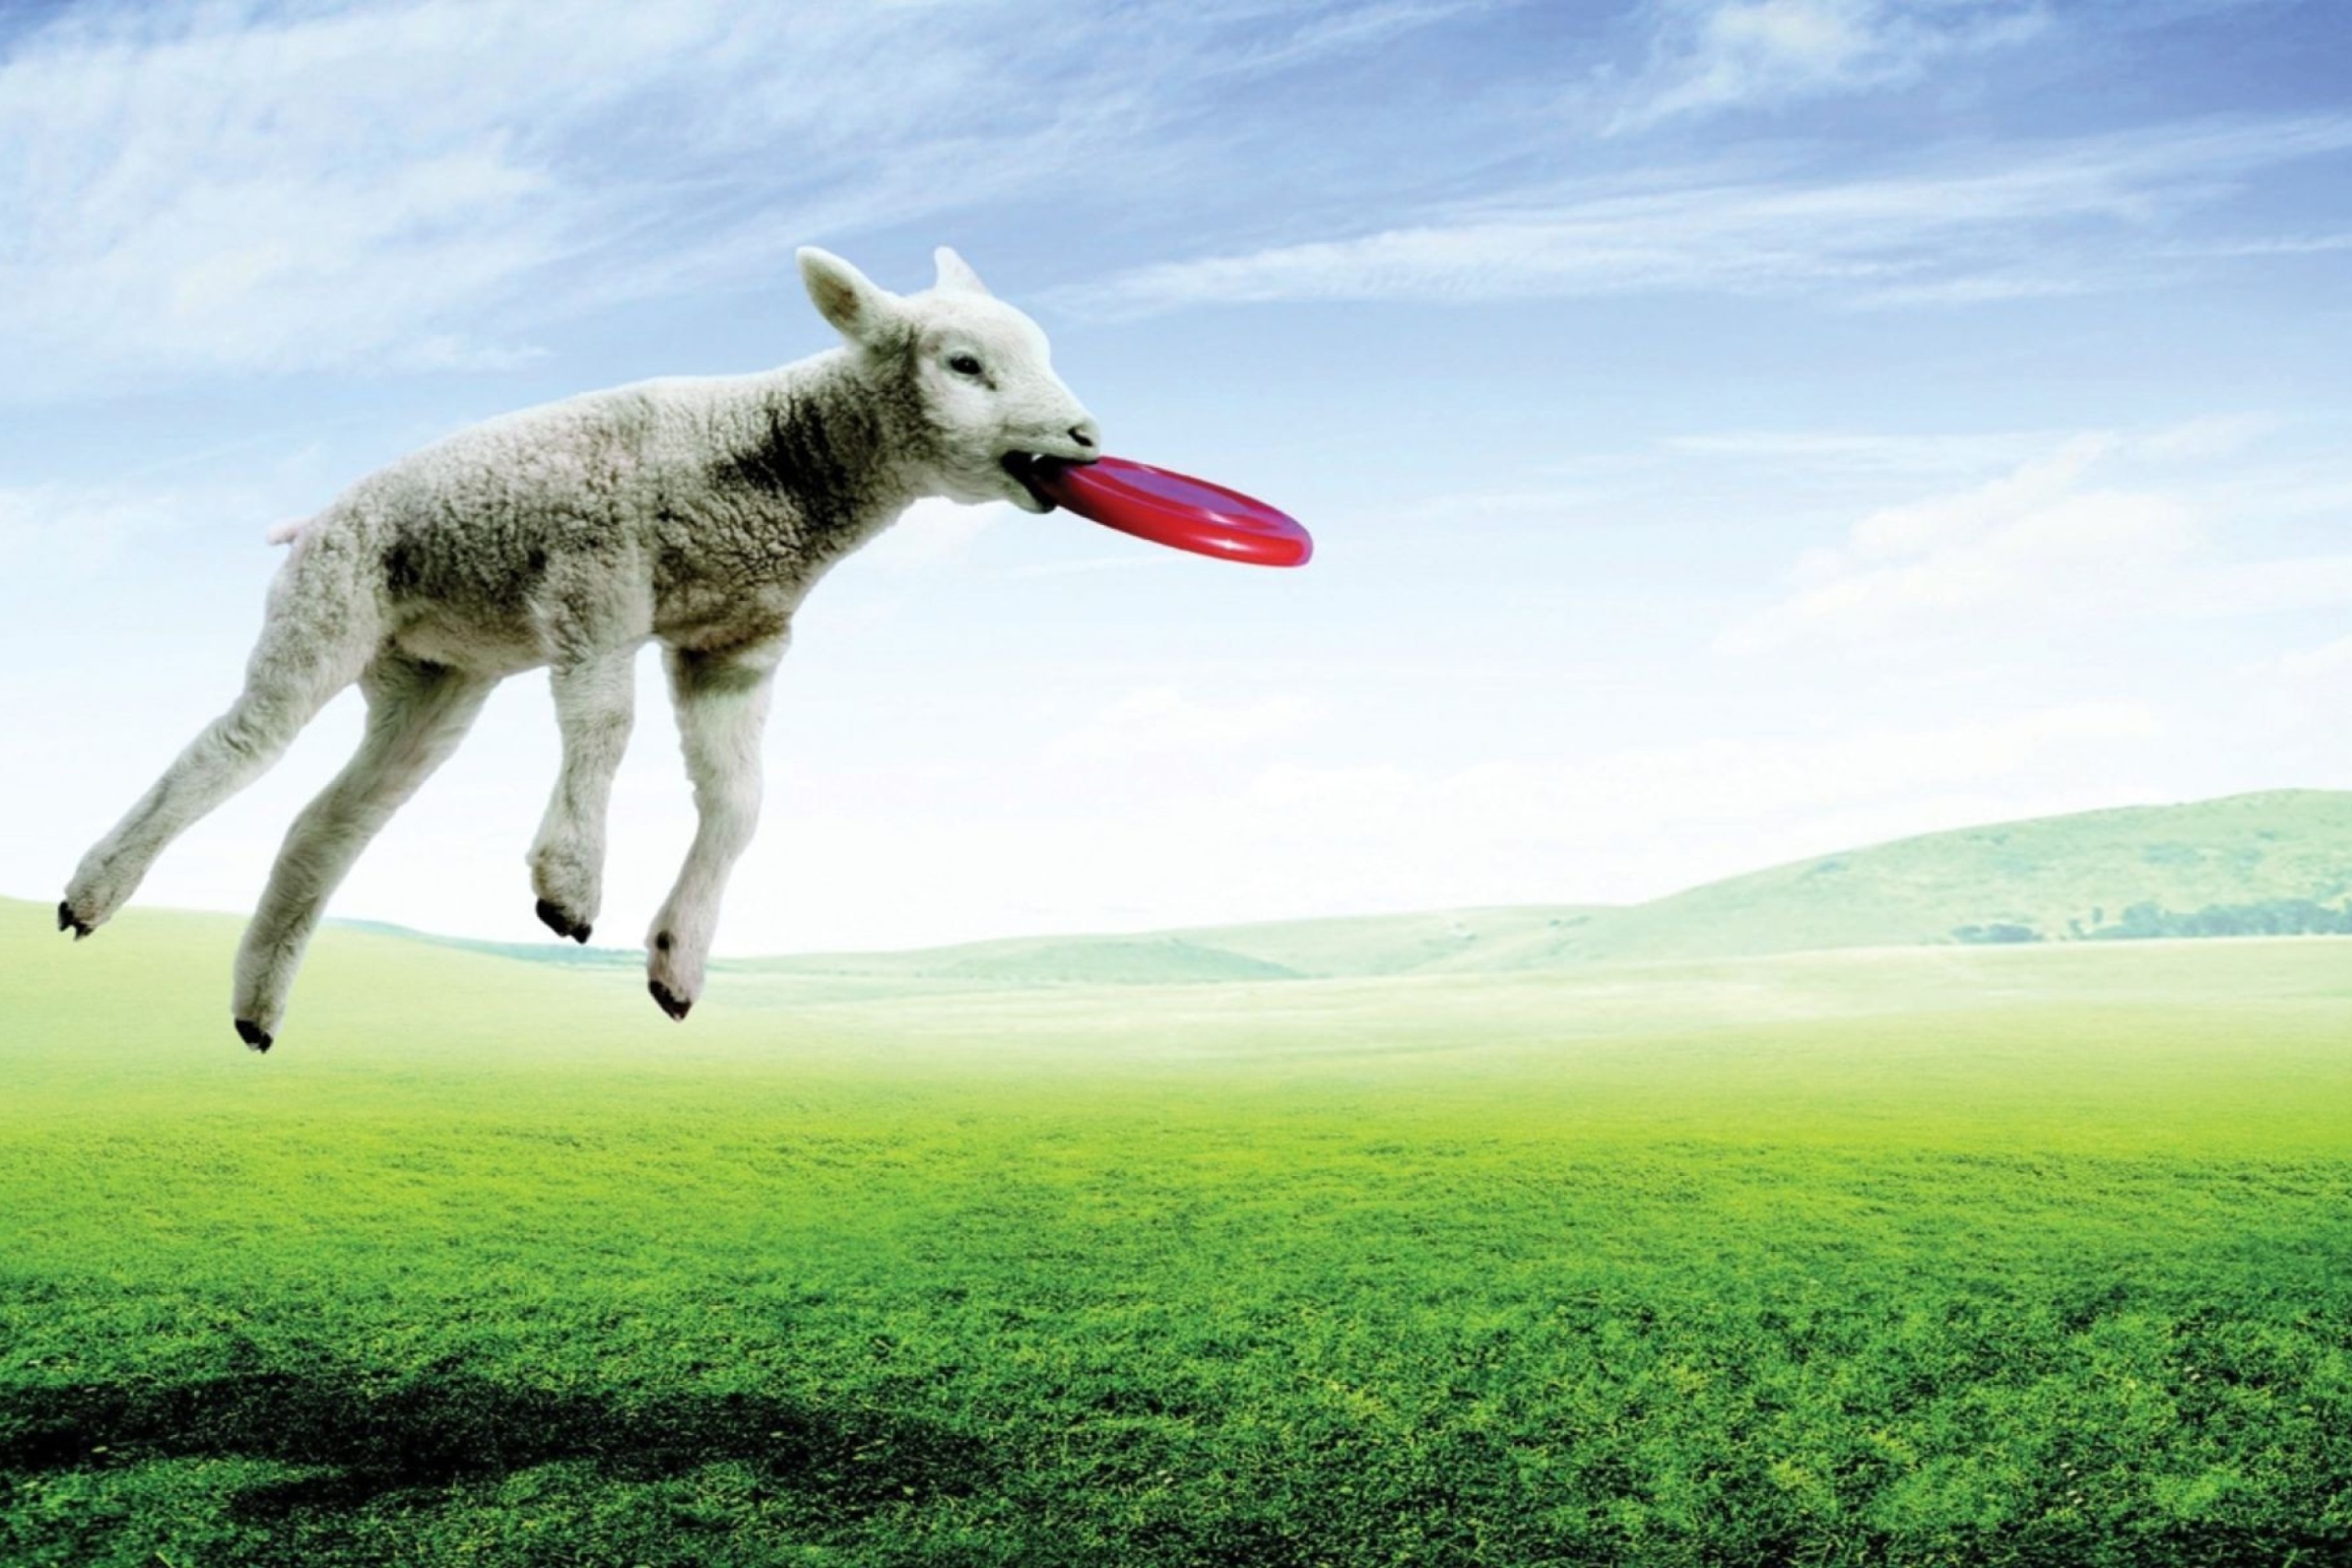 Lamb And Frisby wallpaper 2880x1920